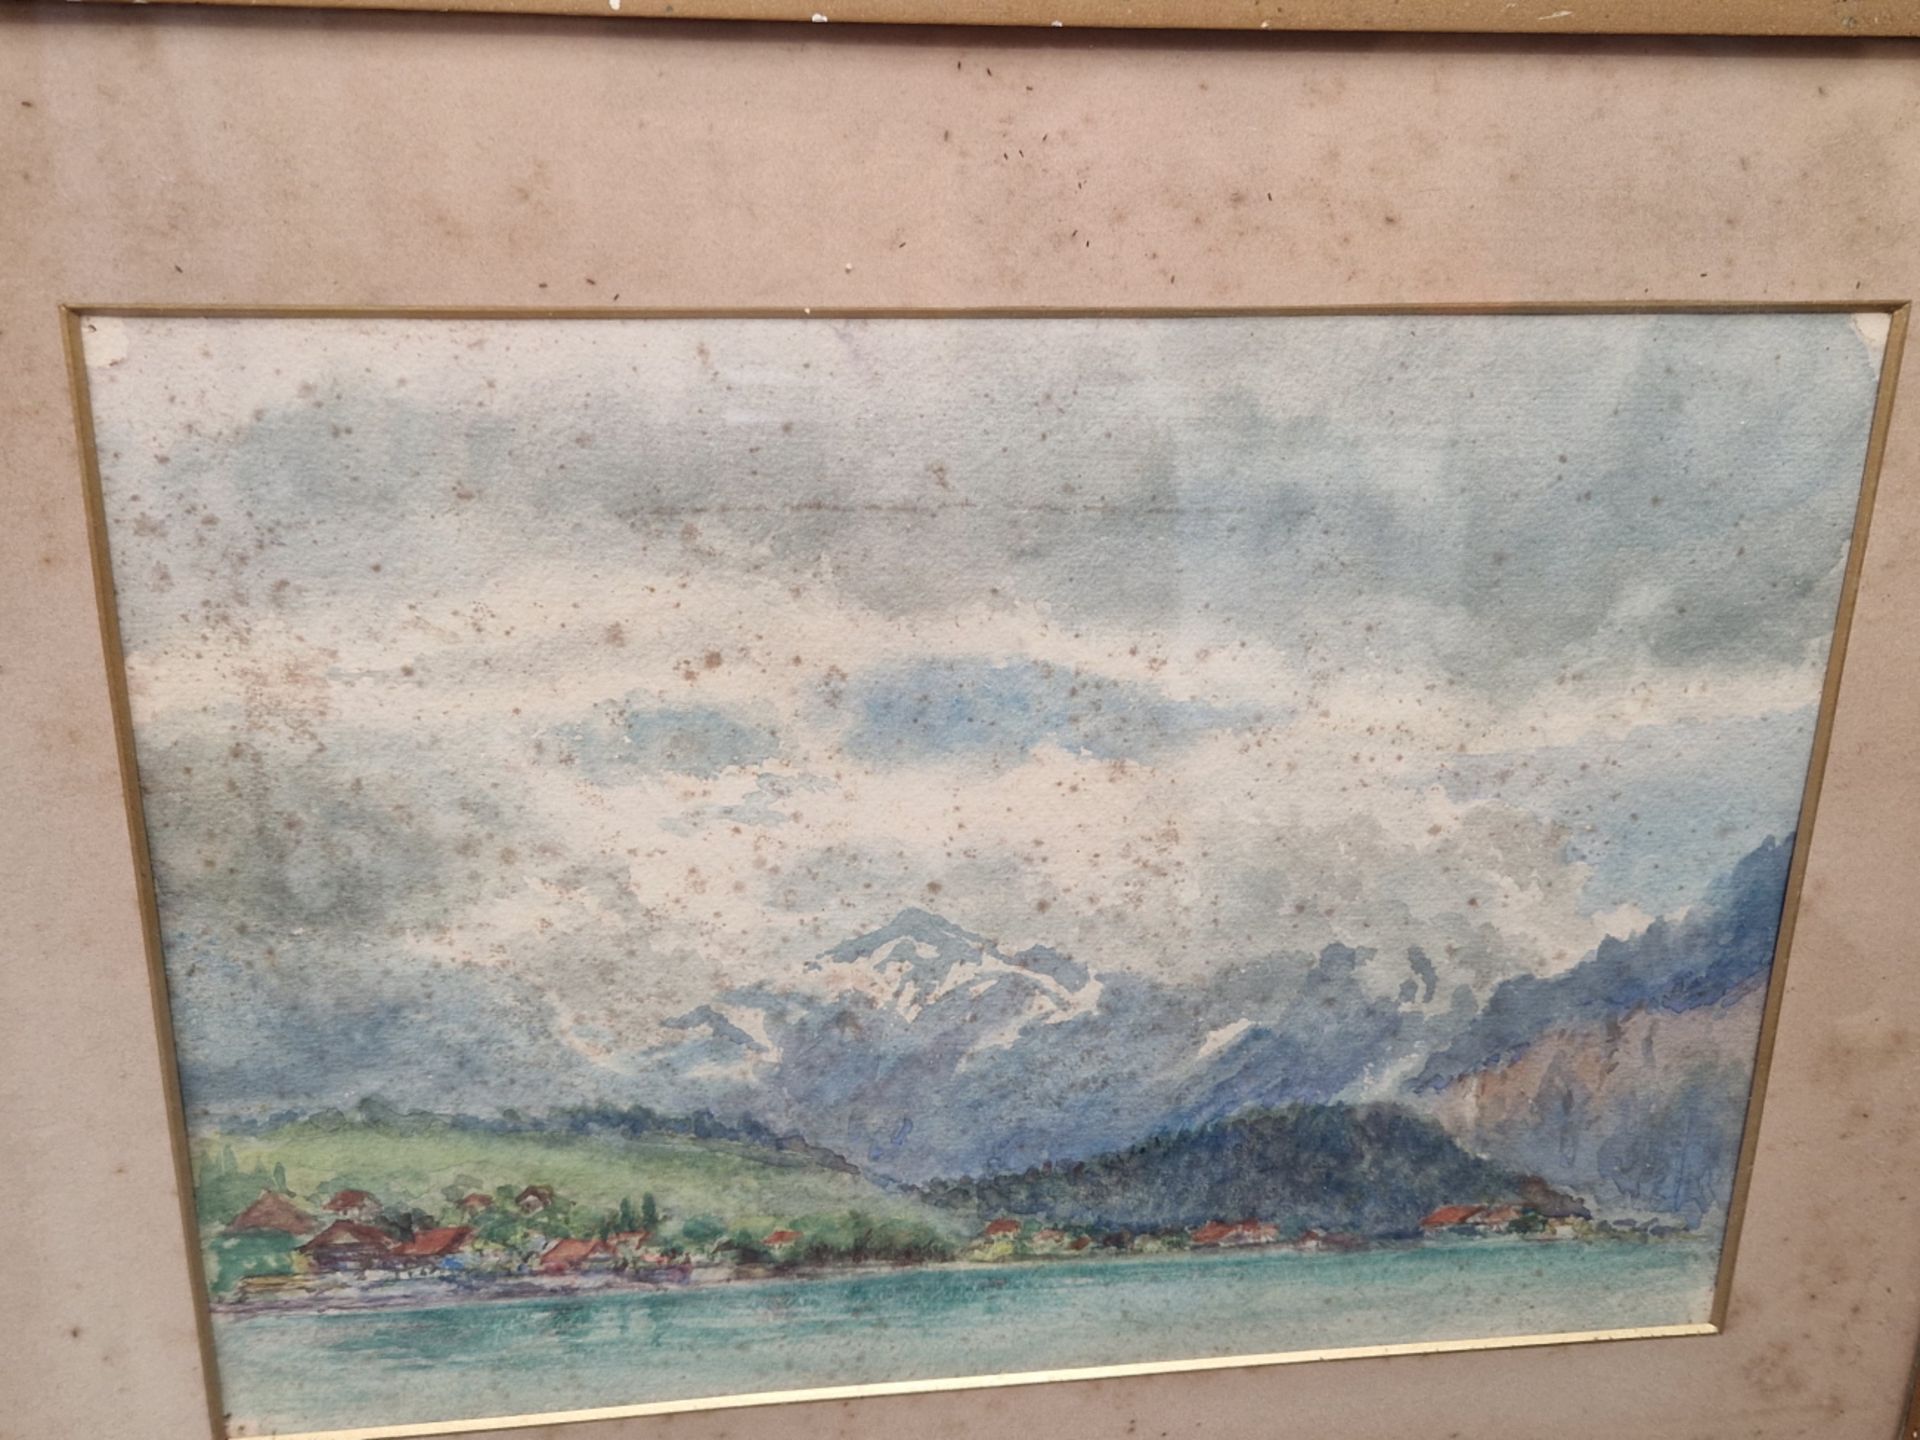 EARLY 20th CENTURY ENGLISH SCHOOL FOUR LANDSCAPE WATERCOLOURS PROBABLY BY THE SAME HAND. SIZES VARY - Image 6 of 6